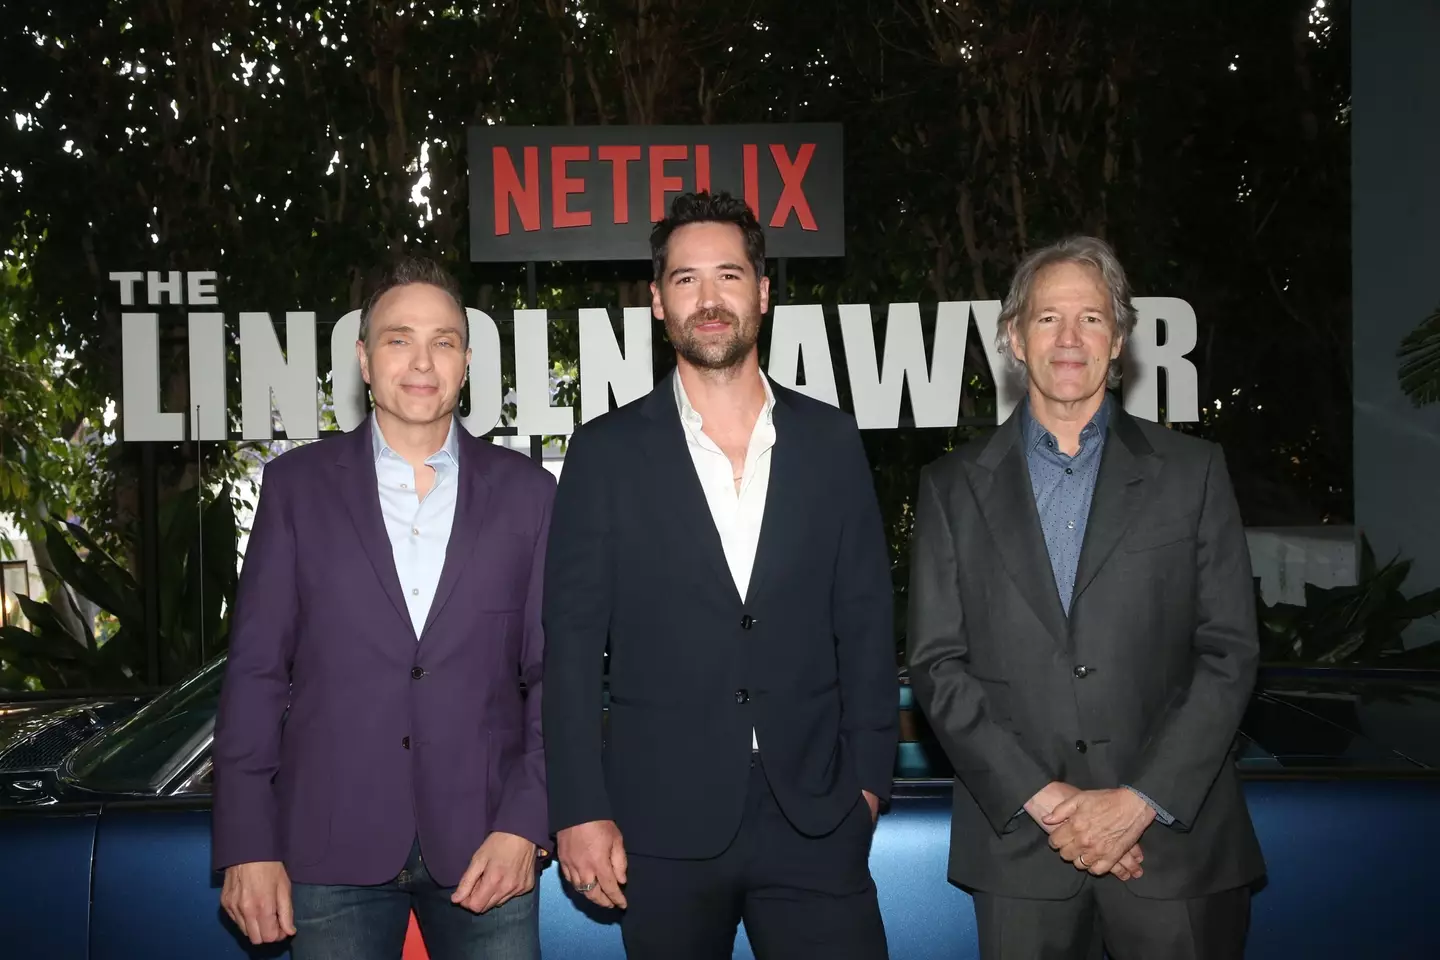  Ted Humphrey, Manuel Garcia-Rulfo, David E. Kelley. The Netflix Premiere of The Lincoln Lawyer held at The London West Hollywood. Credit Alamy